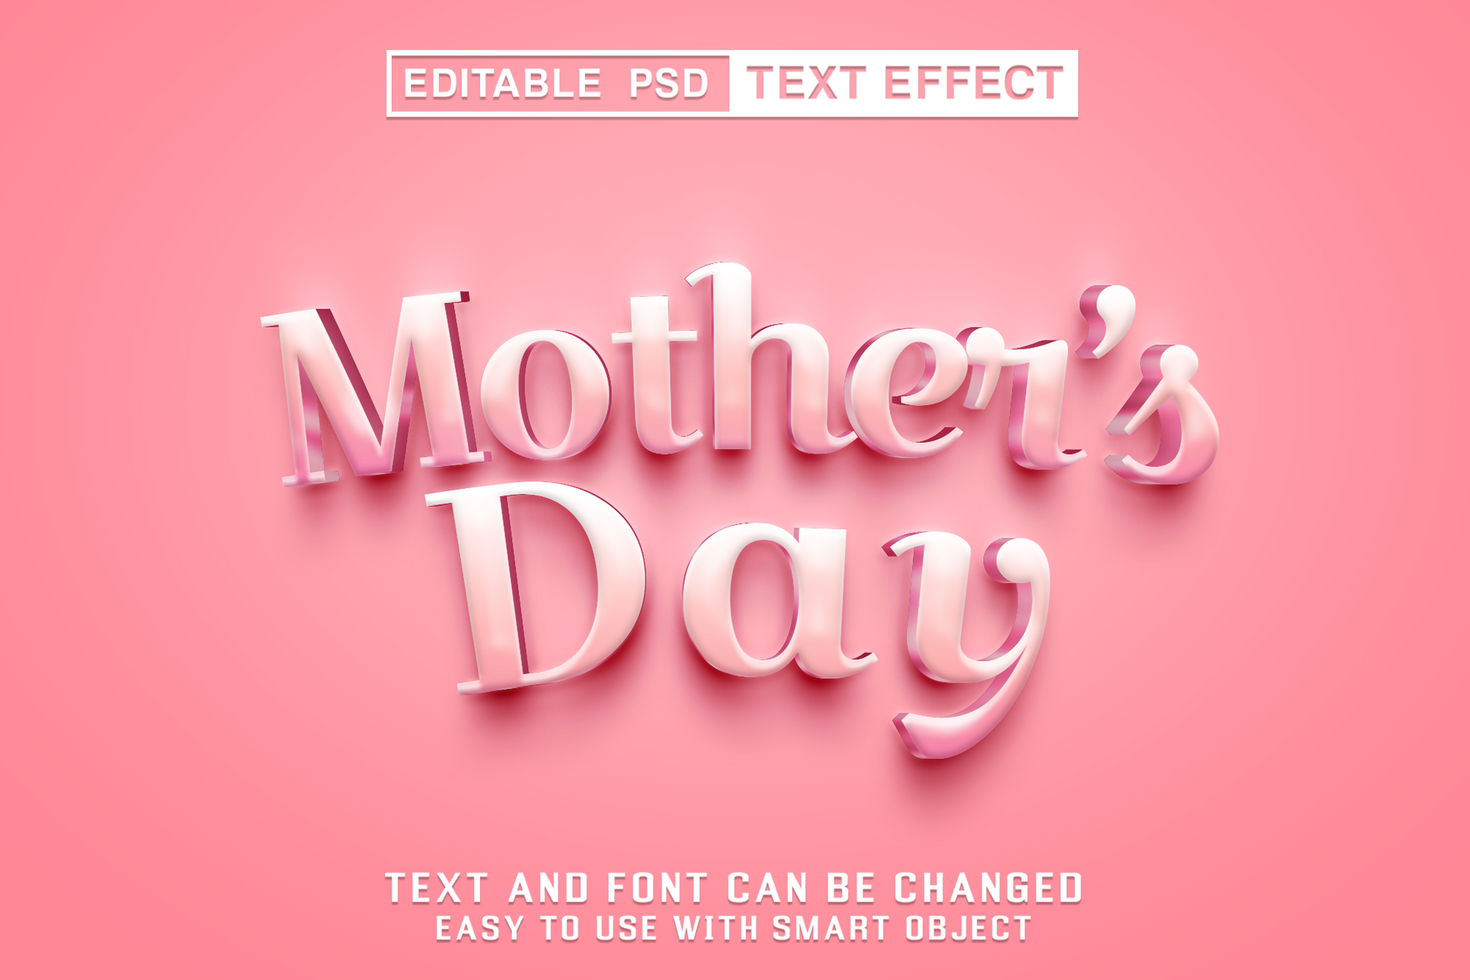 Mother Day Editable Text Effect psd